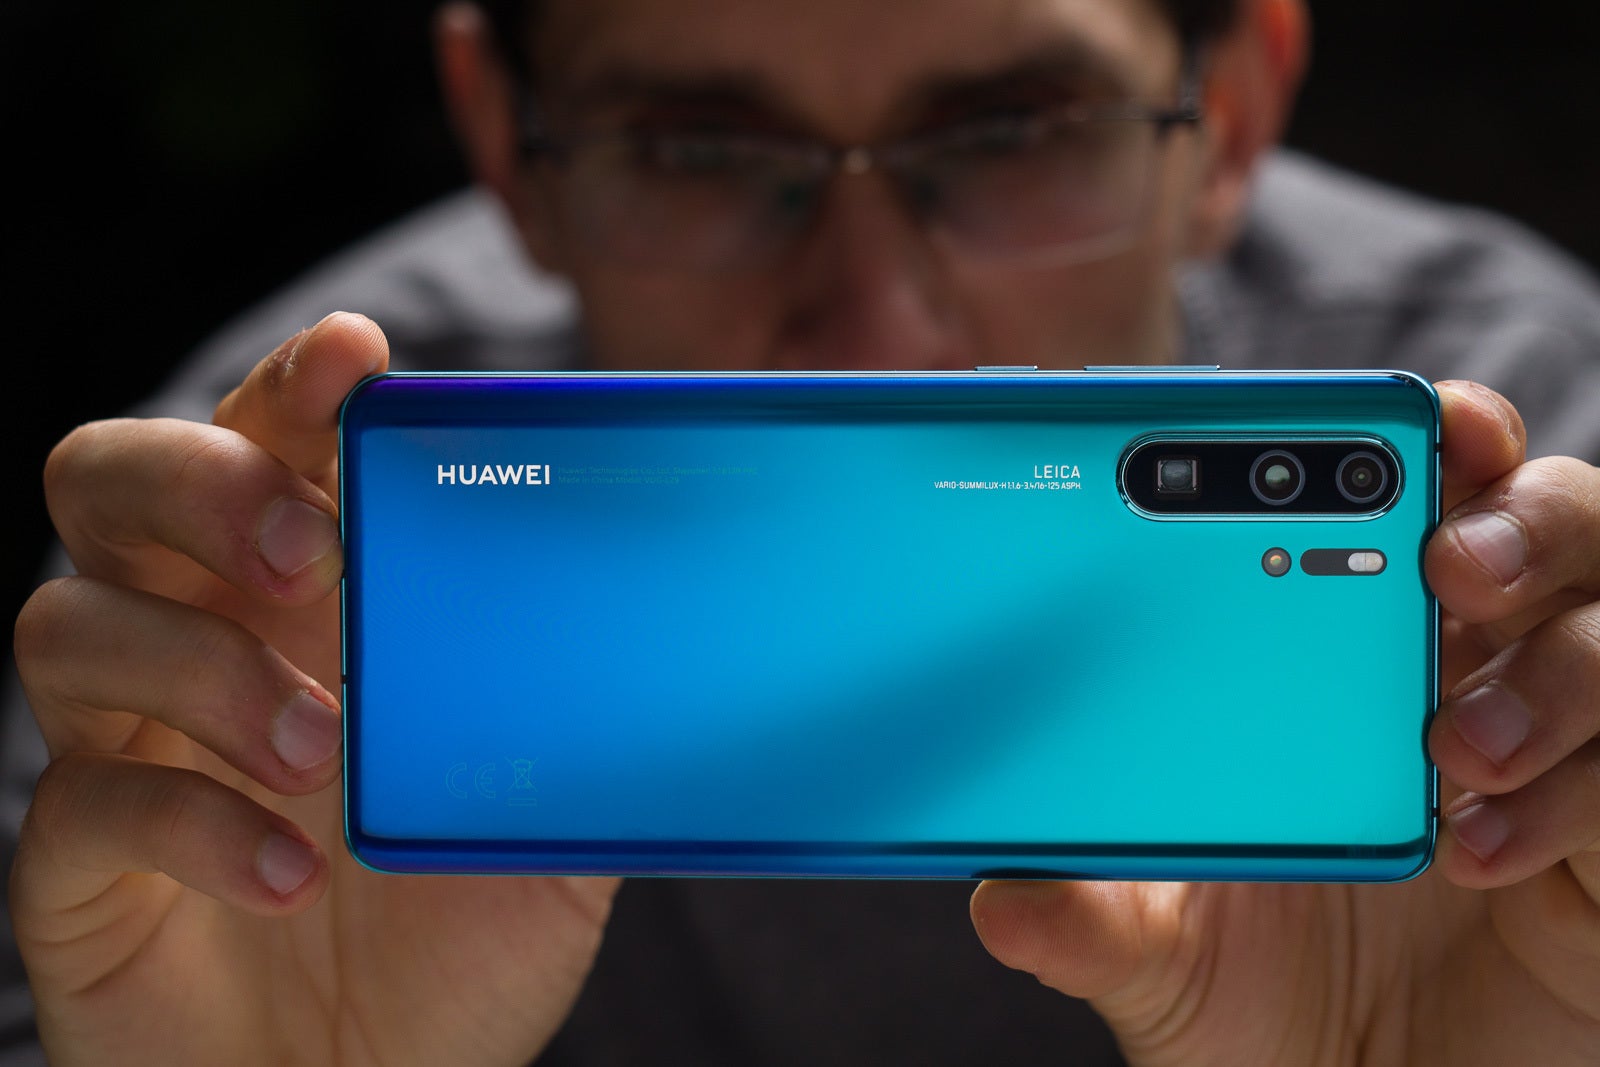 Samsung and Huawei's sales soared last quarter as Apple fell further behind